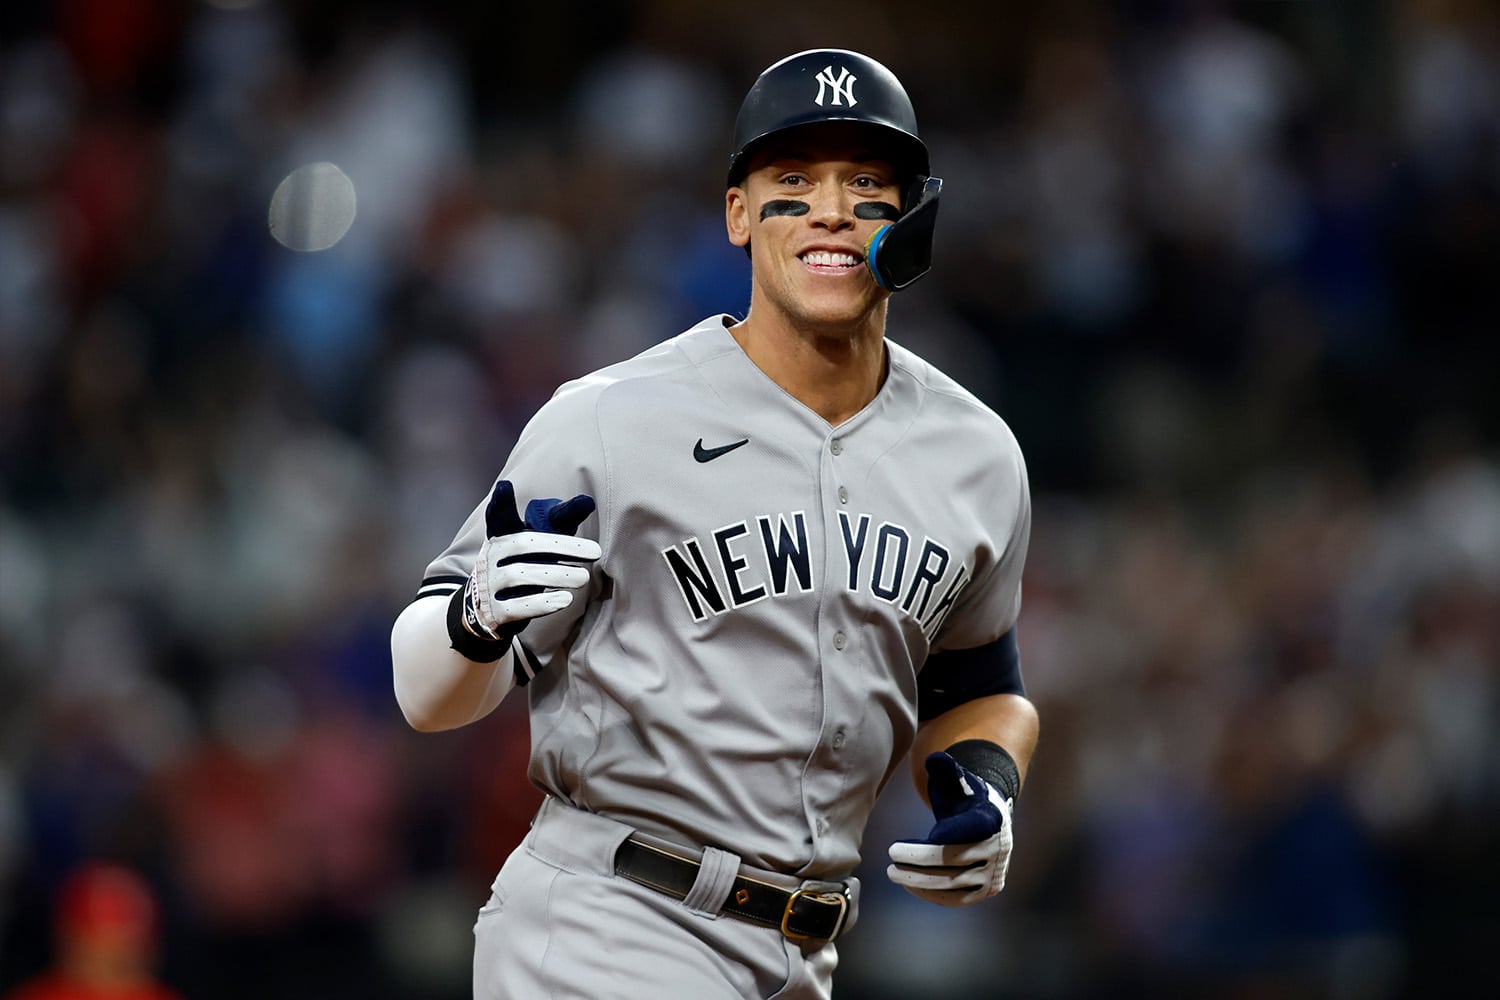 Yankees' Aaron Judge tops MLB jersey sales for 3rd year running